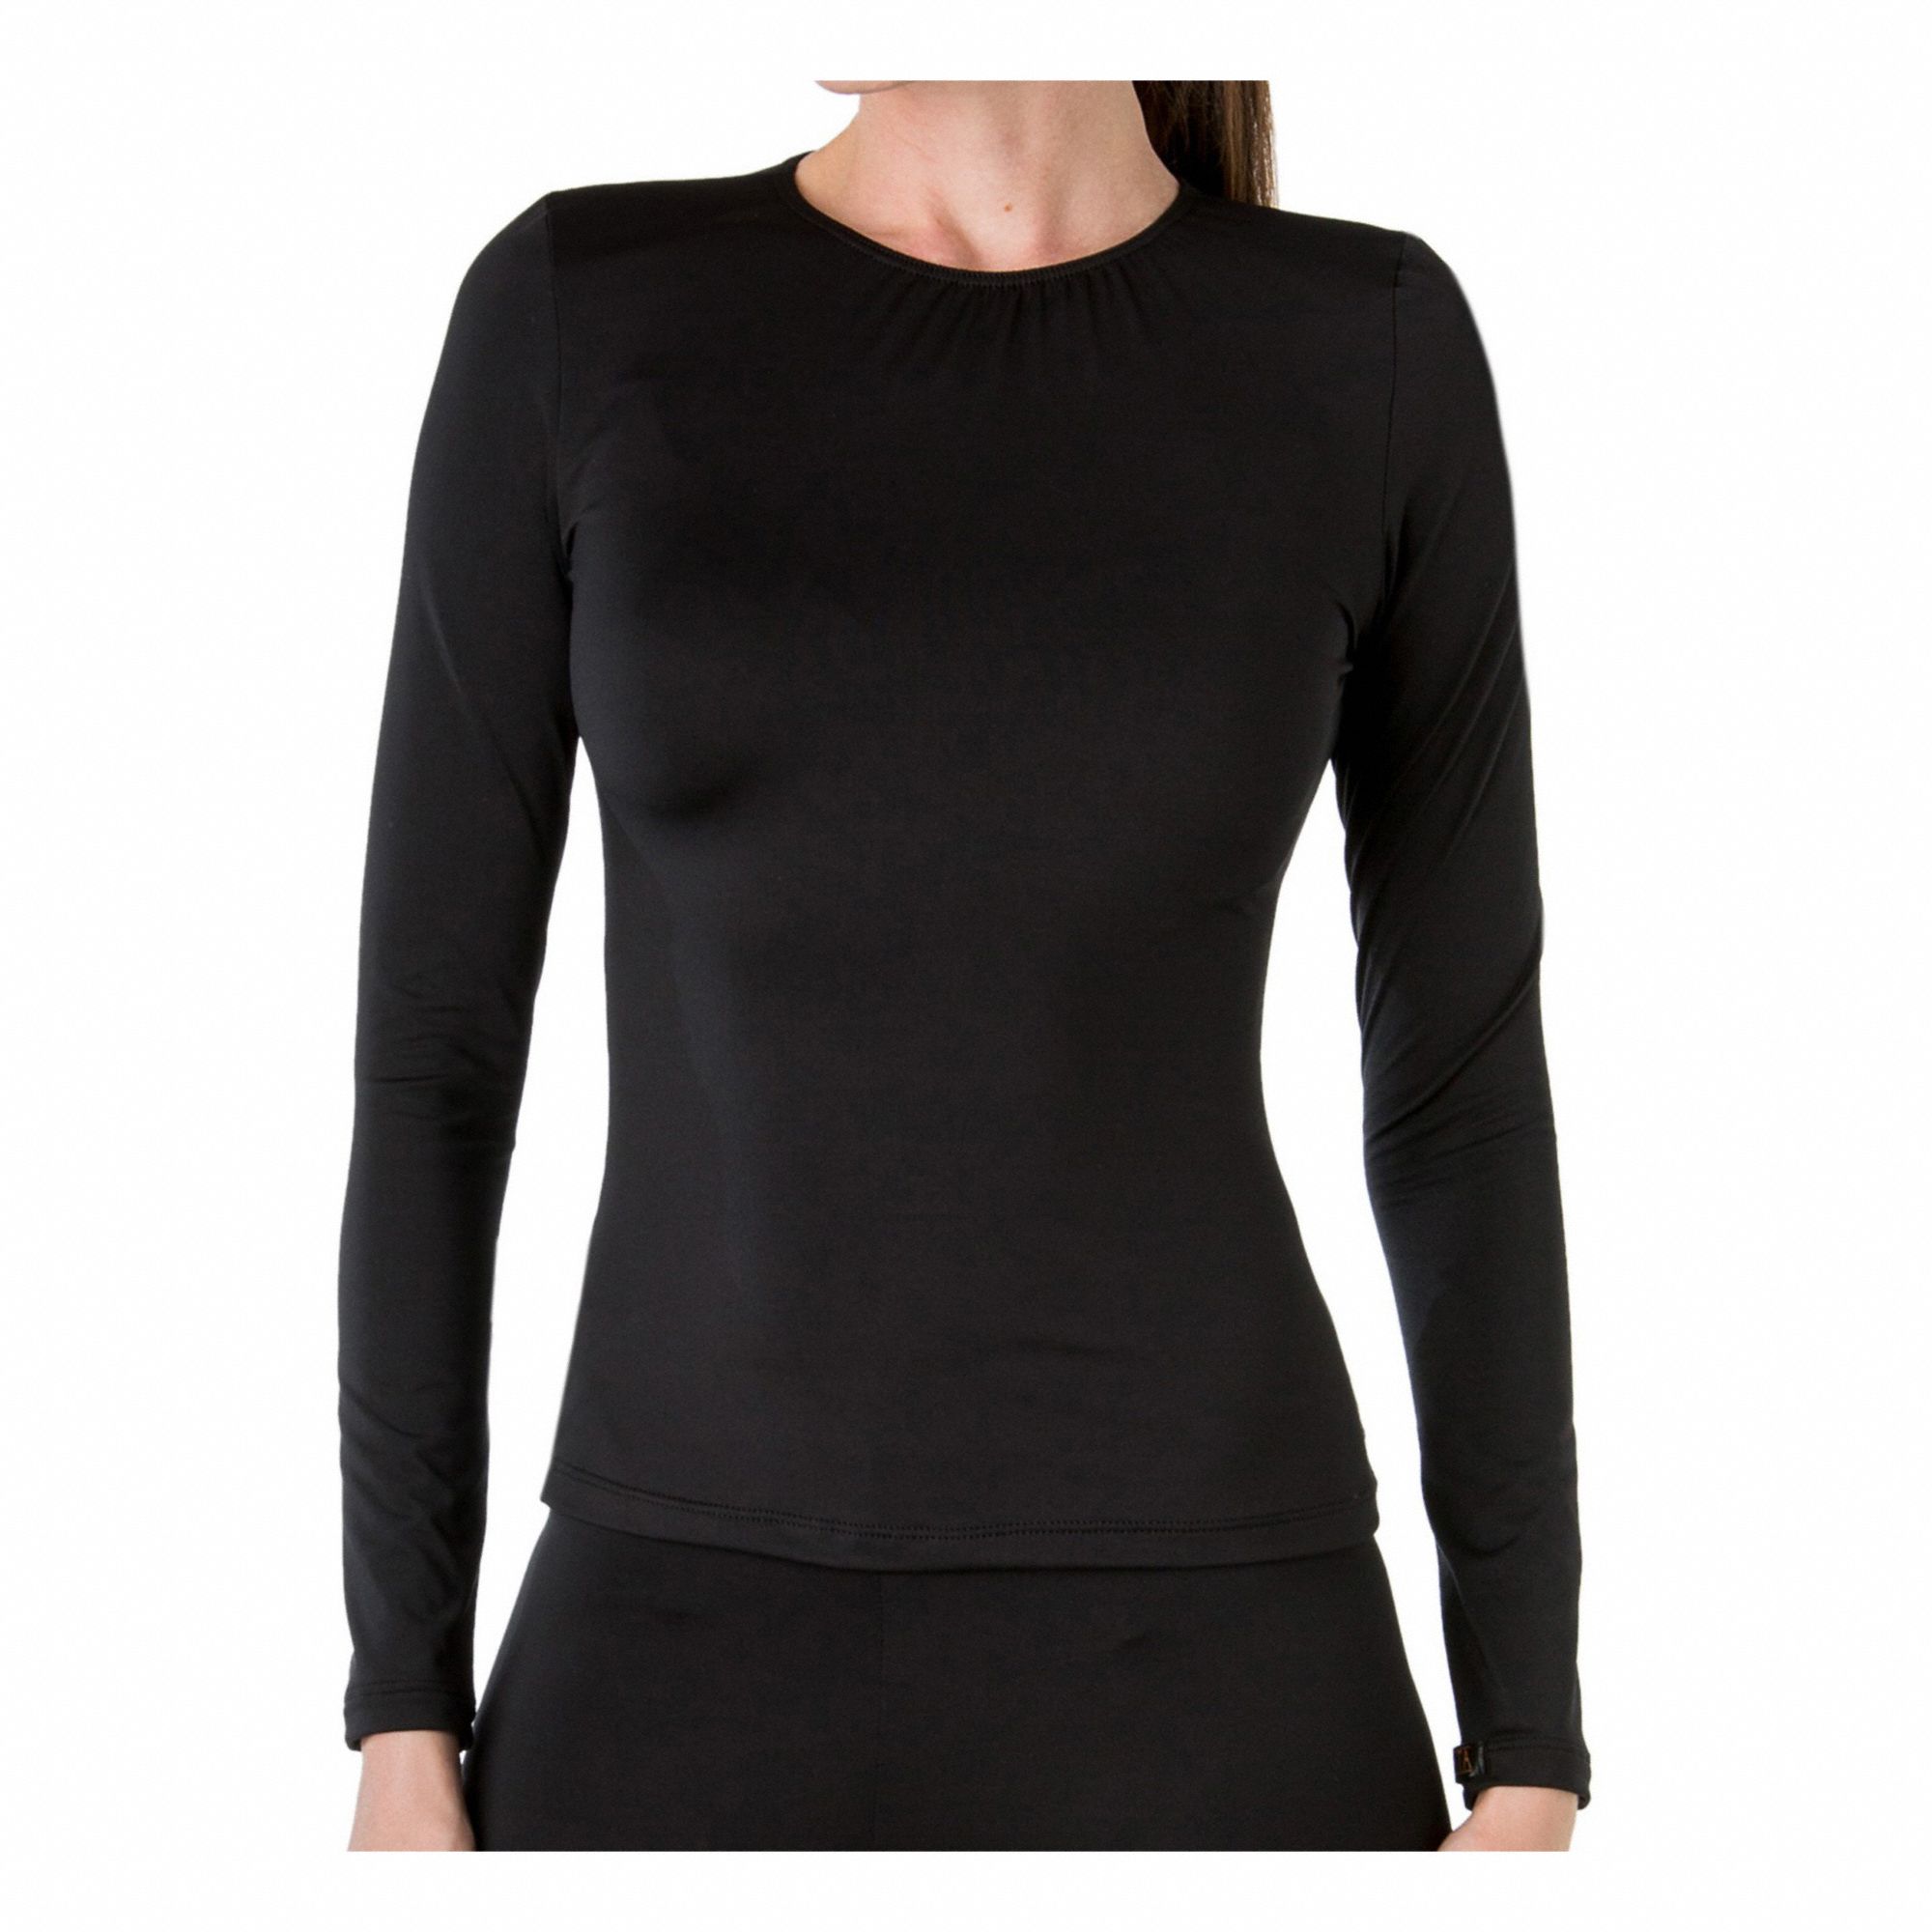 STANFIELD'S LIMITED THERMAL SHIRT, WOMEN'S, 210 GSM, CHEST 41-43, BLACK,  X-LARGE, MERINO WOOL - Thermal Underwear - NVT8333-552XL